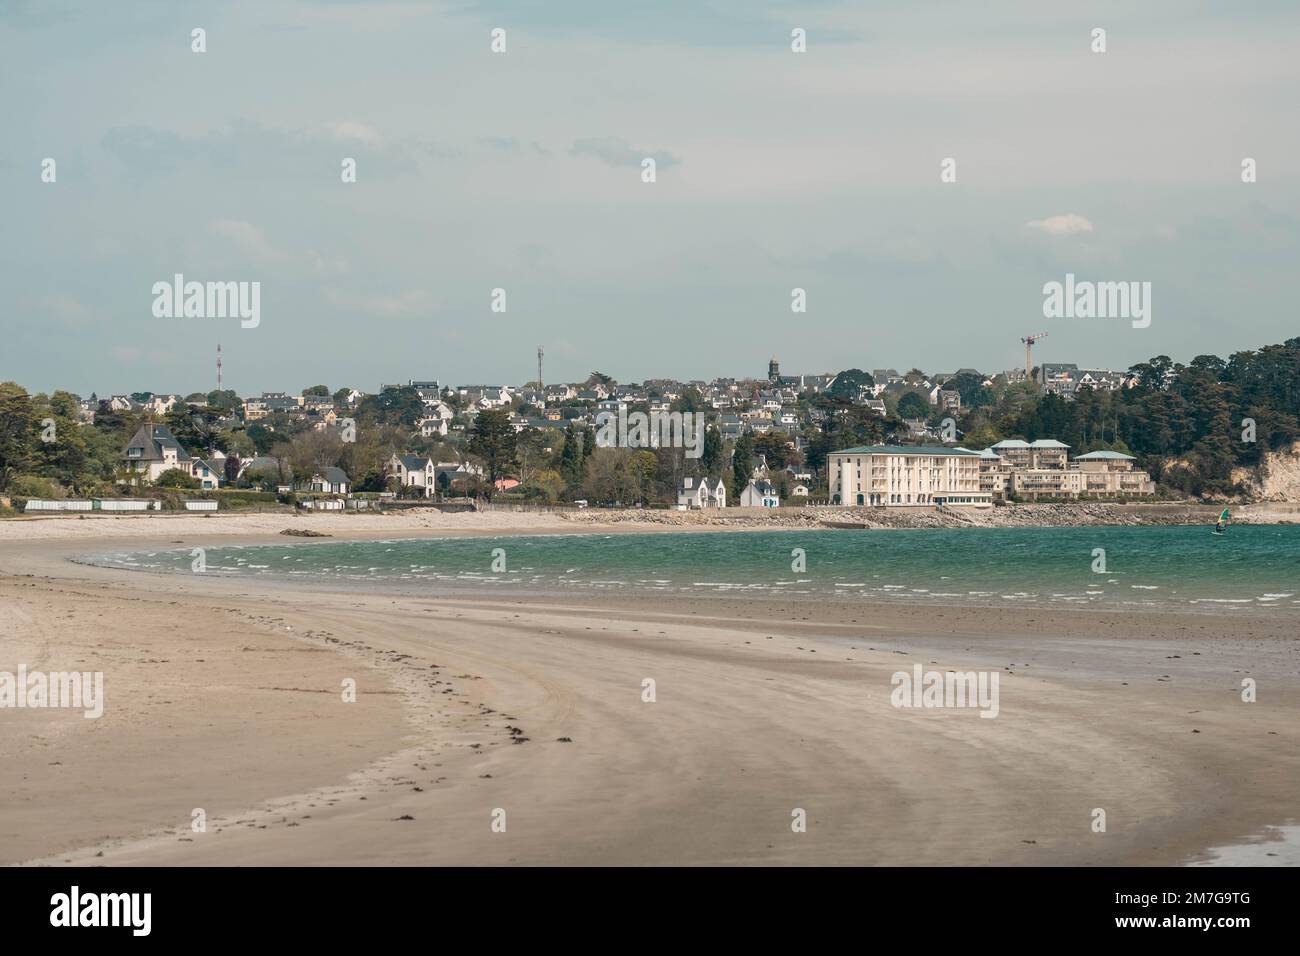 A serene beach scene in Brittany, France, with a cloudy sky and houses in the background. Stock Photo